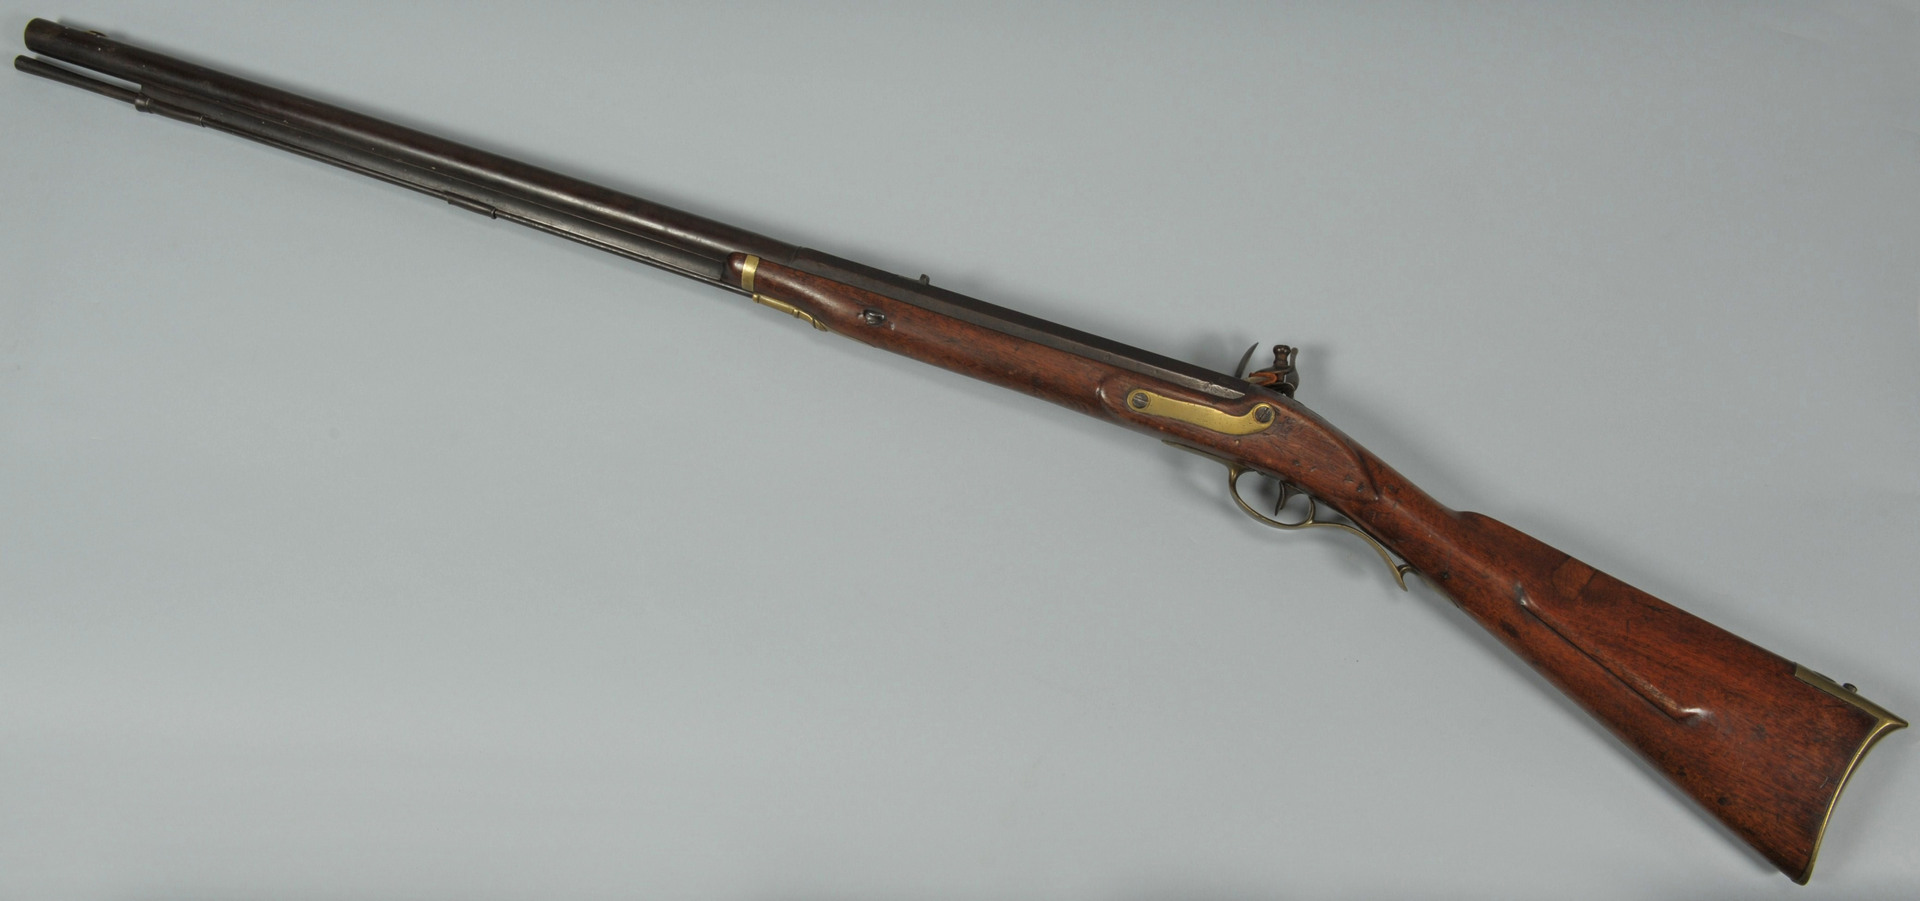 HD Quality Wallpaper | Collection: Weapons, 1920x901 Harper's Ferry Model 1803 Rifle